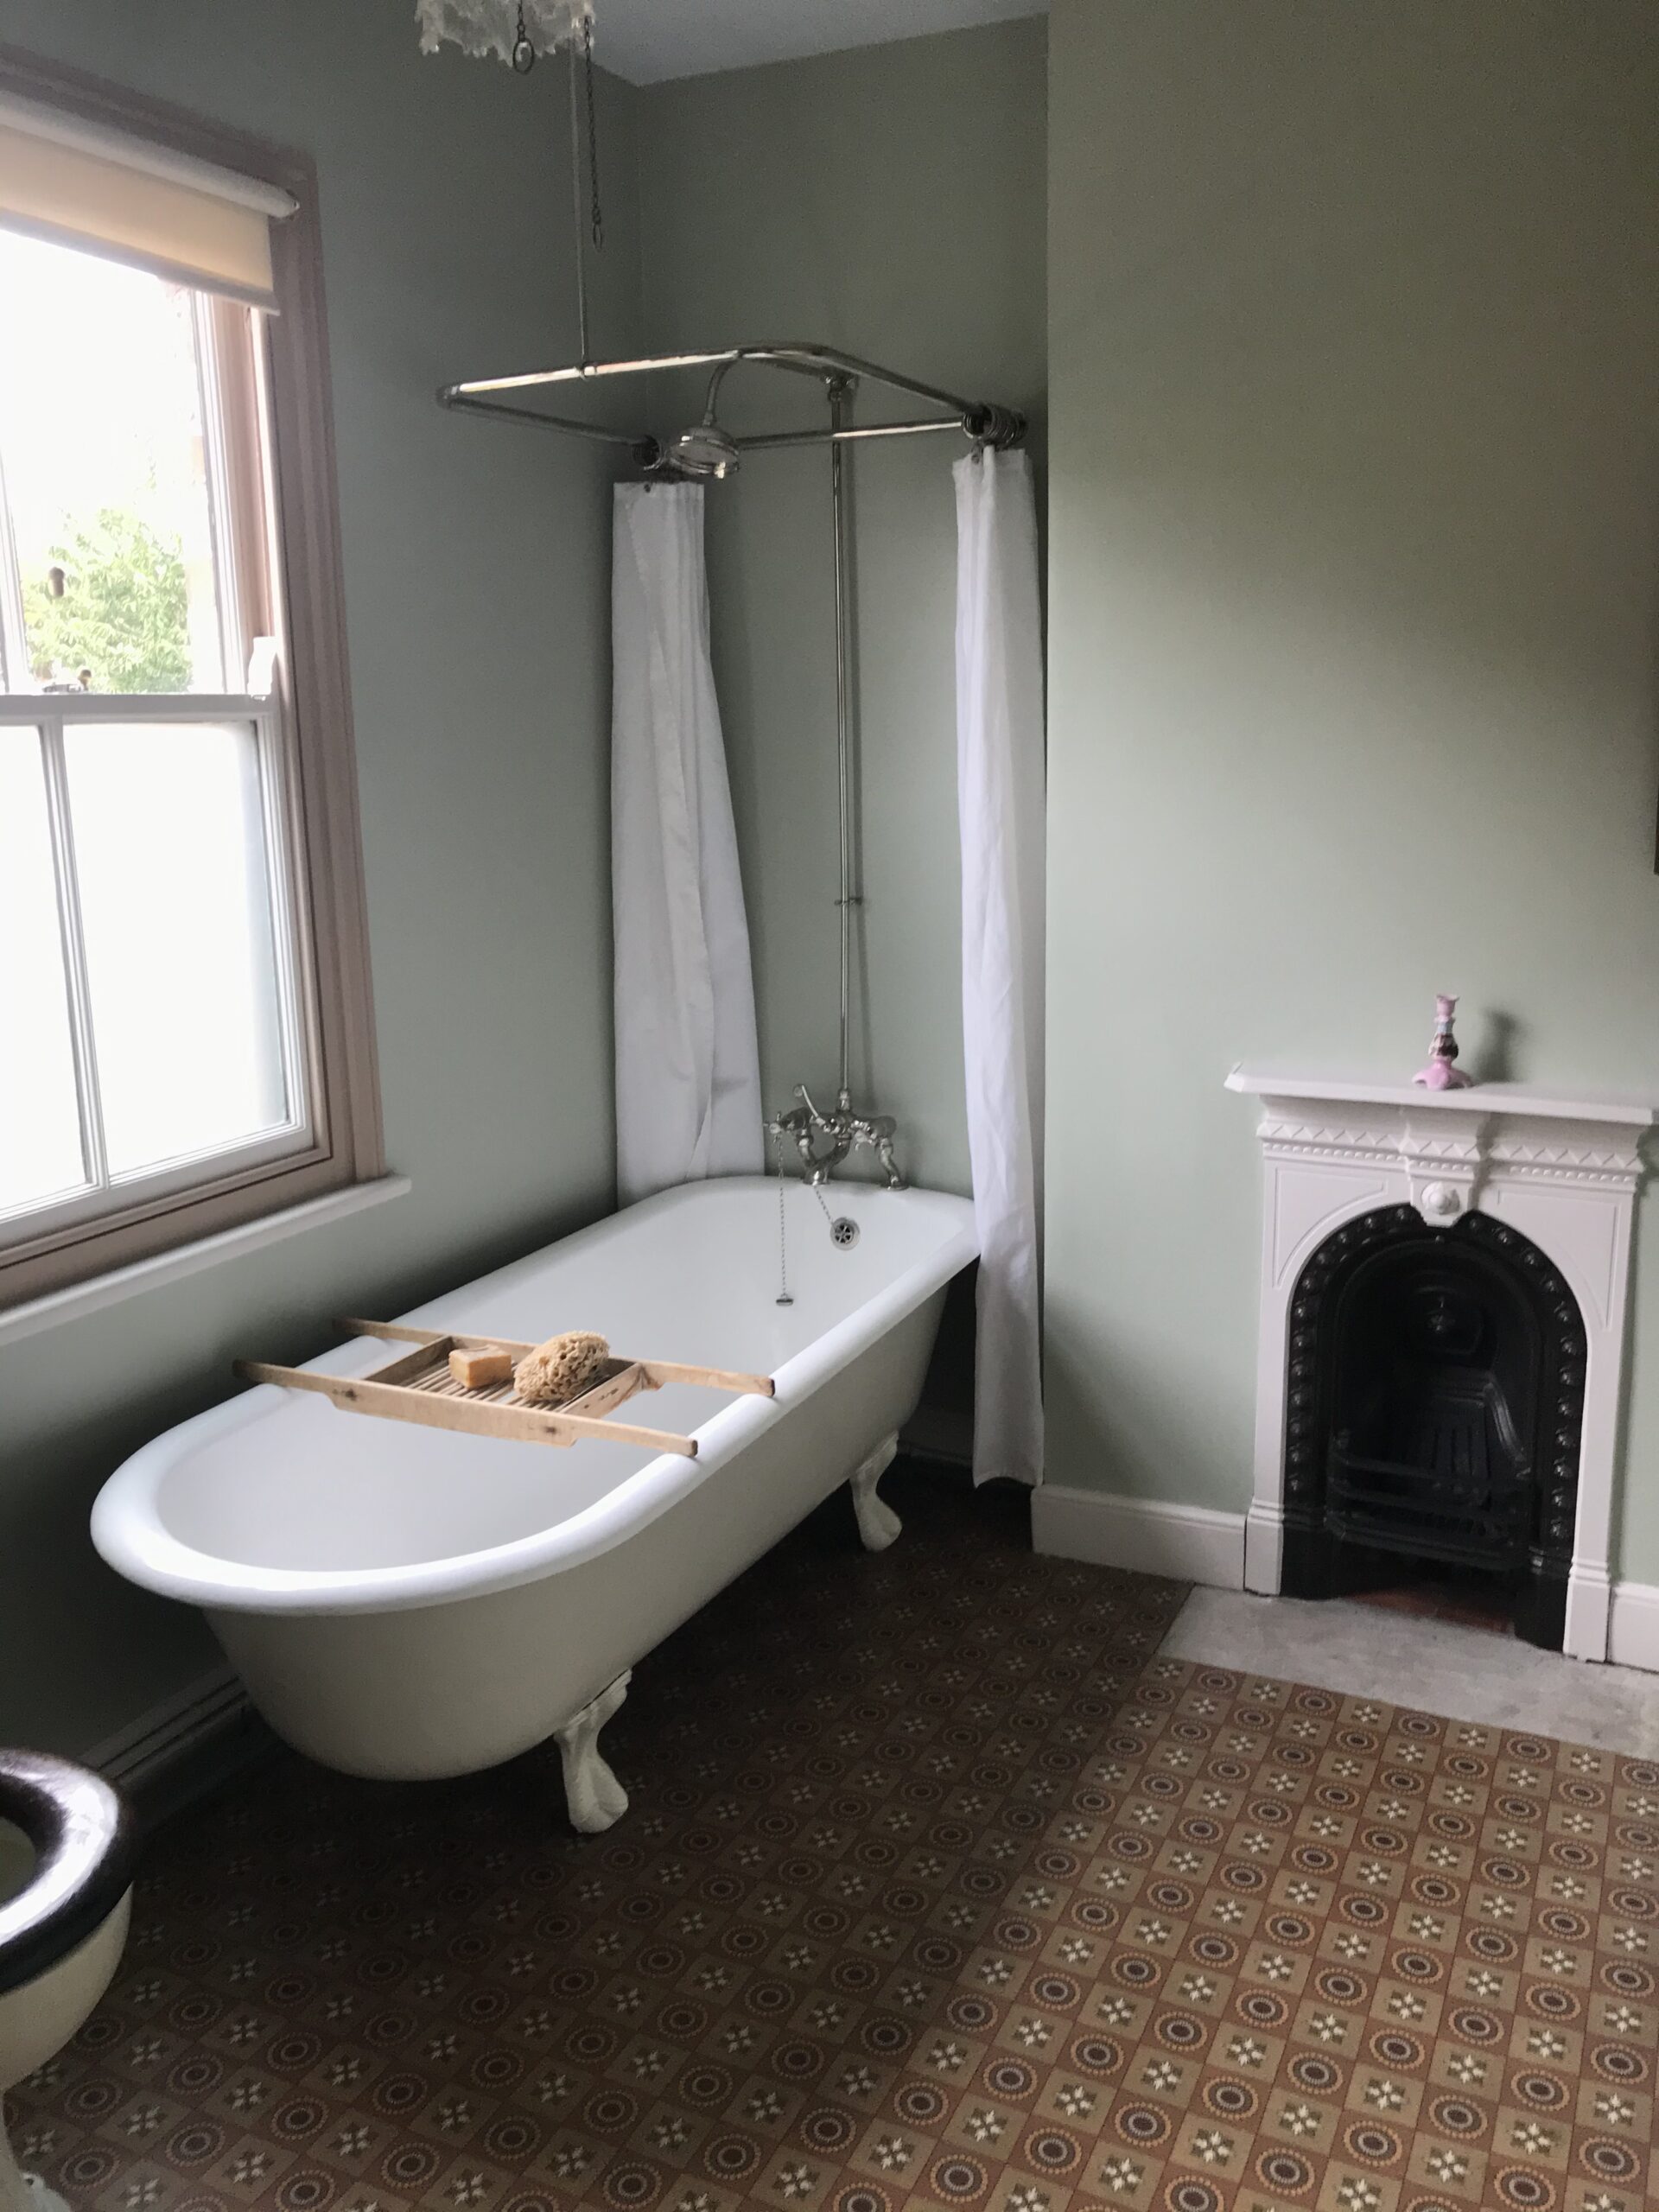 Edwardian bathroom with fireplace and Doulton bath